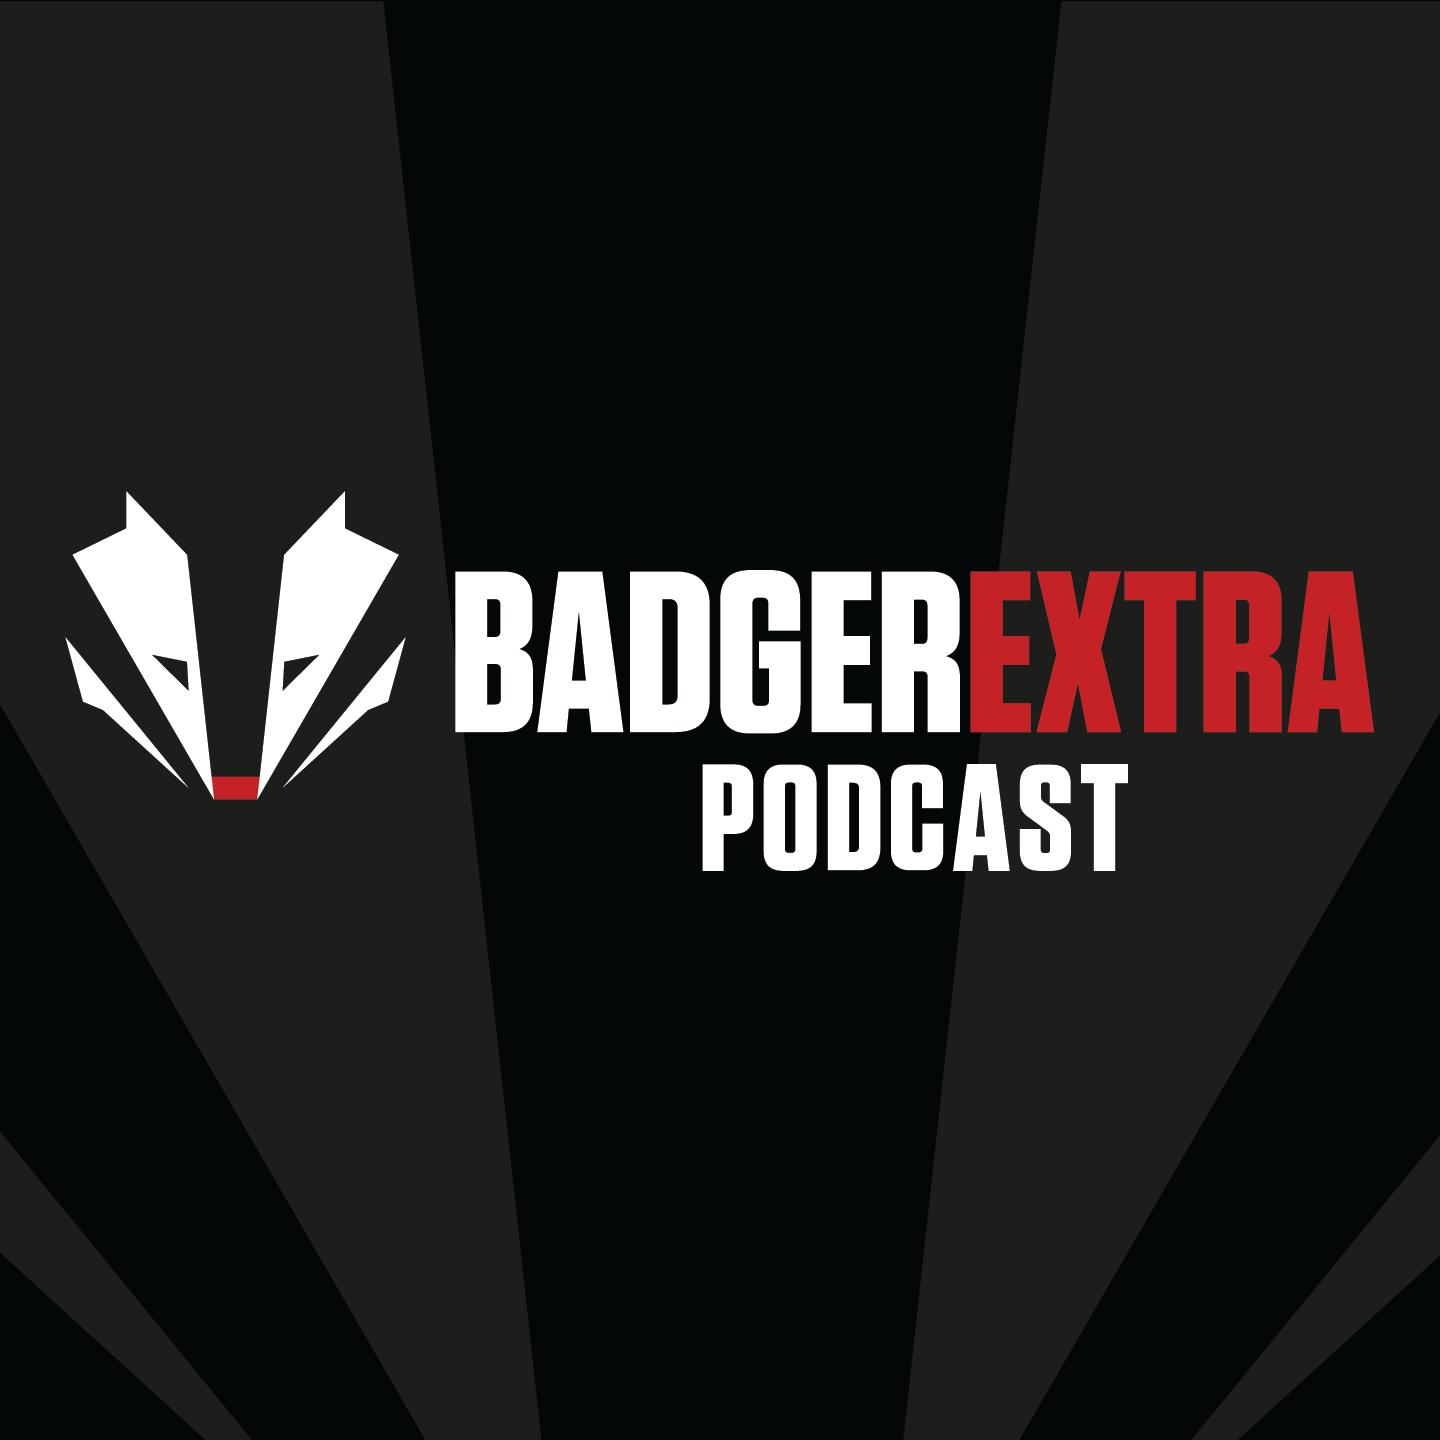 The BadgerExtra Podcast